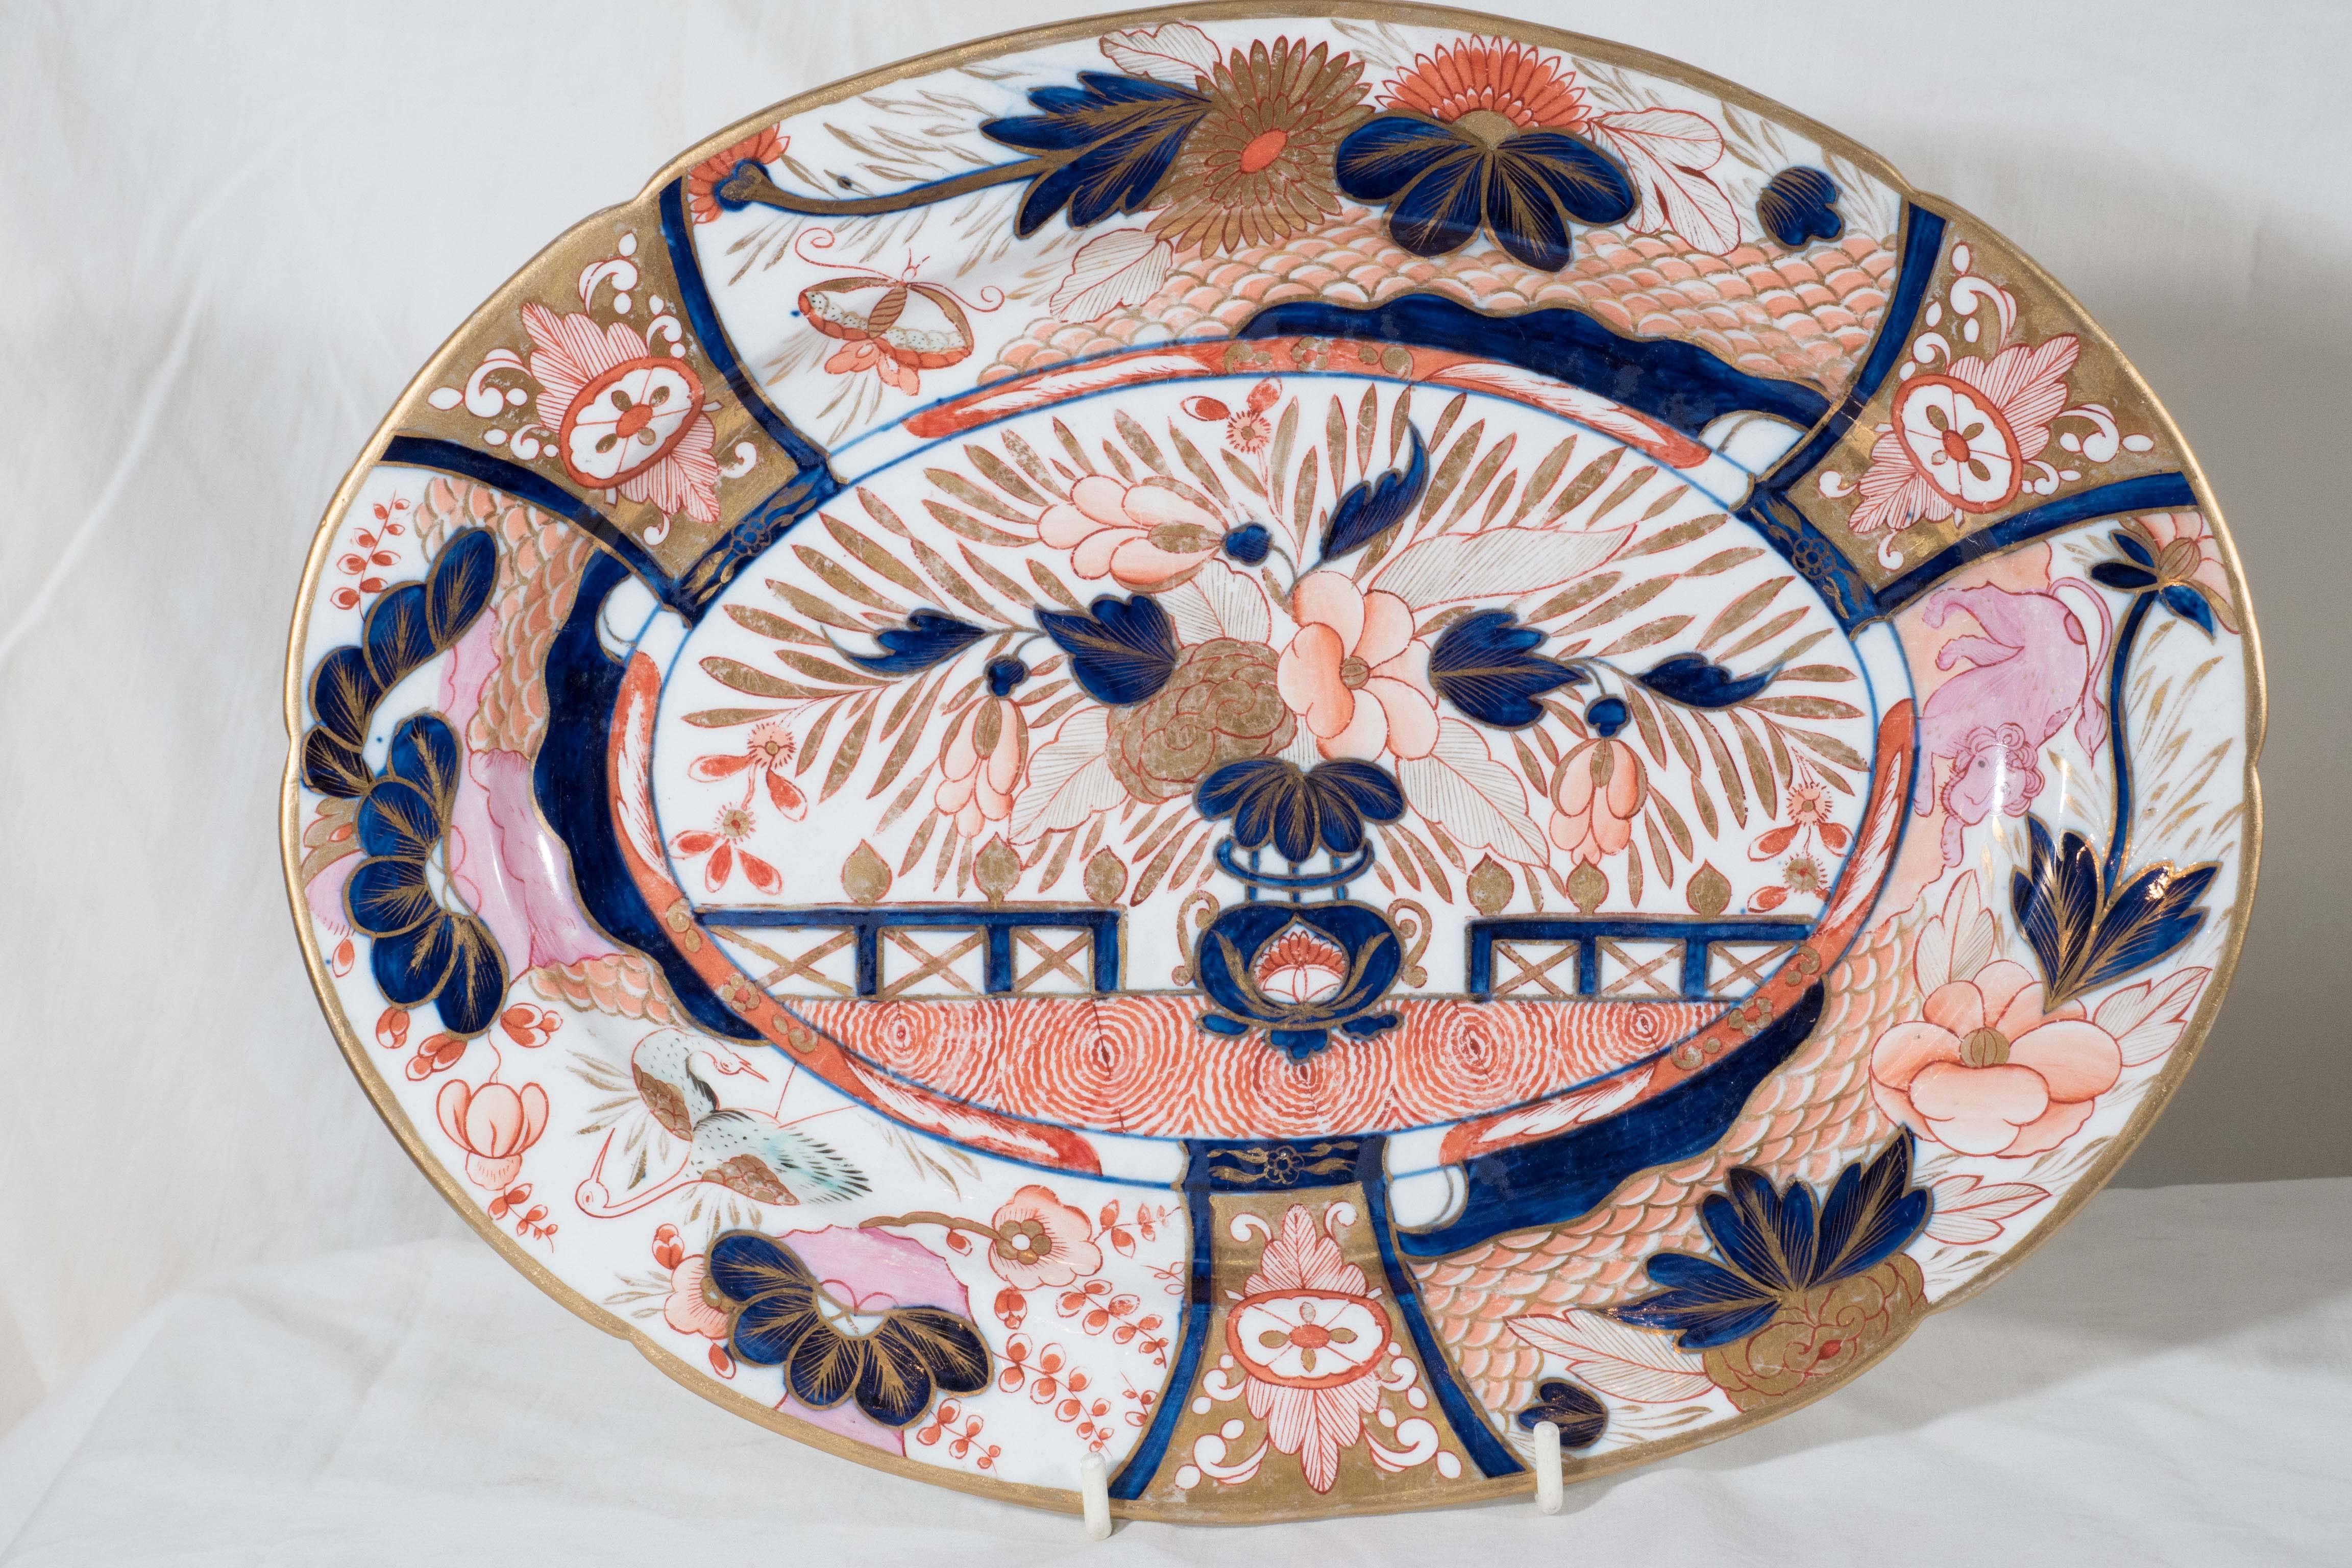 A pair of Coalport platters decorated with a traditional Imari scene. Hand-painted in cobalt blue, iron red and richly gilded these platters each have the whimsical pink lion and turquoise water birds which are the distinguishing characteristics of